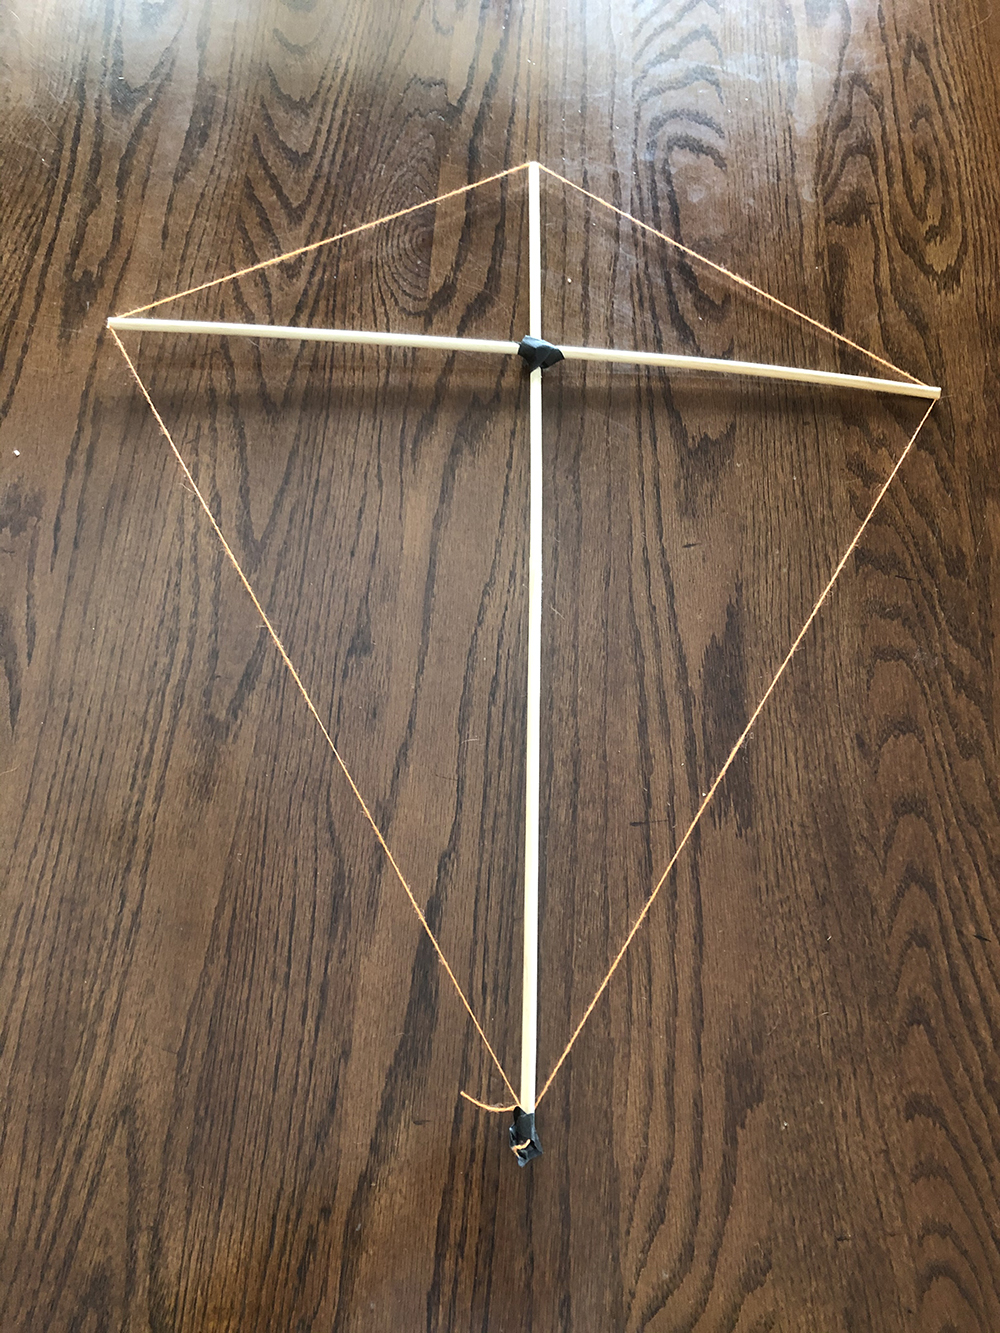 Dowels with string wrapped around the perimeter forming a classic diamond kite shape